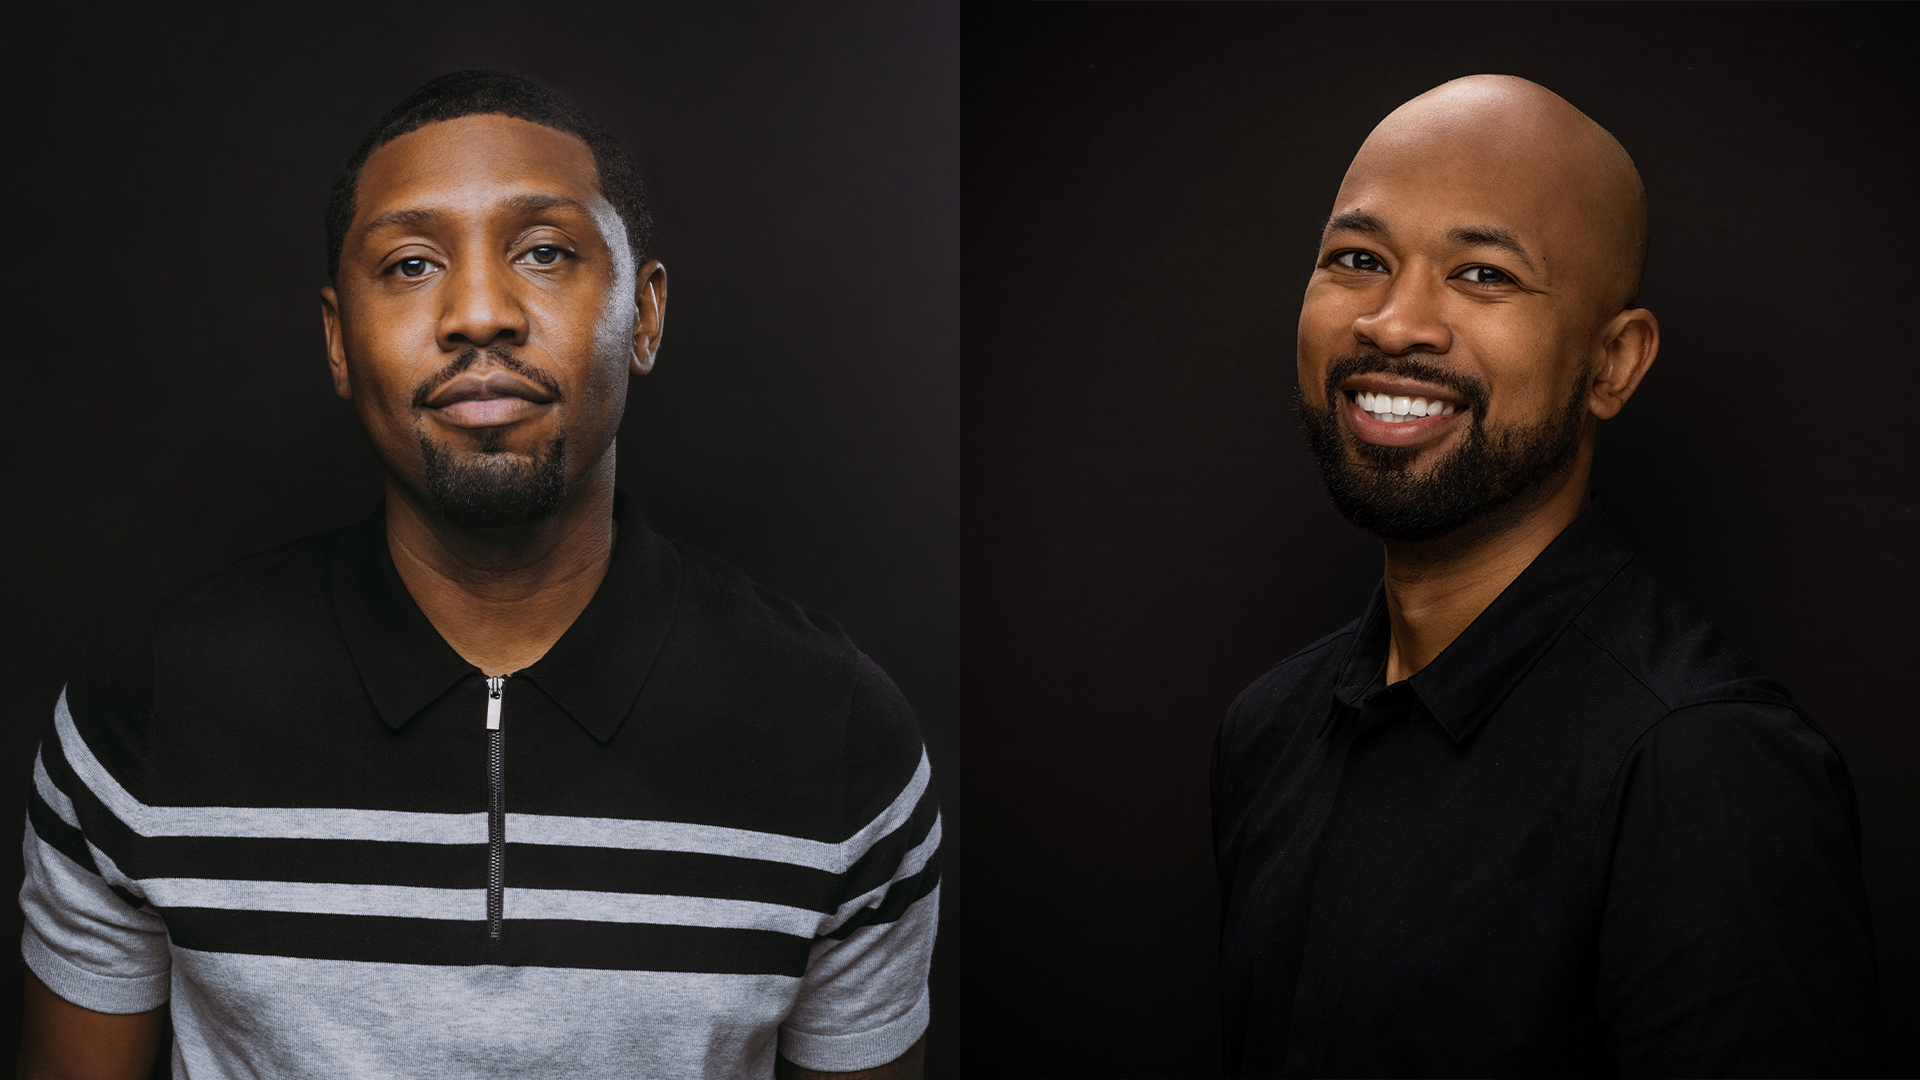 BLK & Bold Co-Founders Steered Their Coffee Business From A Couch And Garage To One Of Iowa's Rapidly Growing Companies